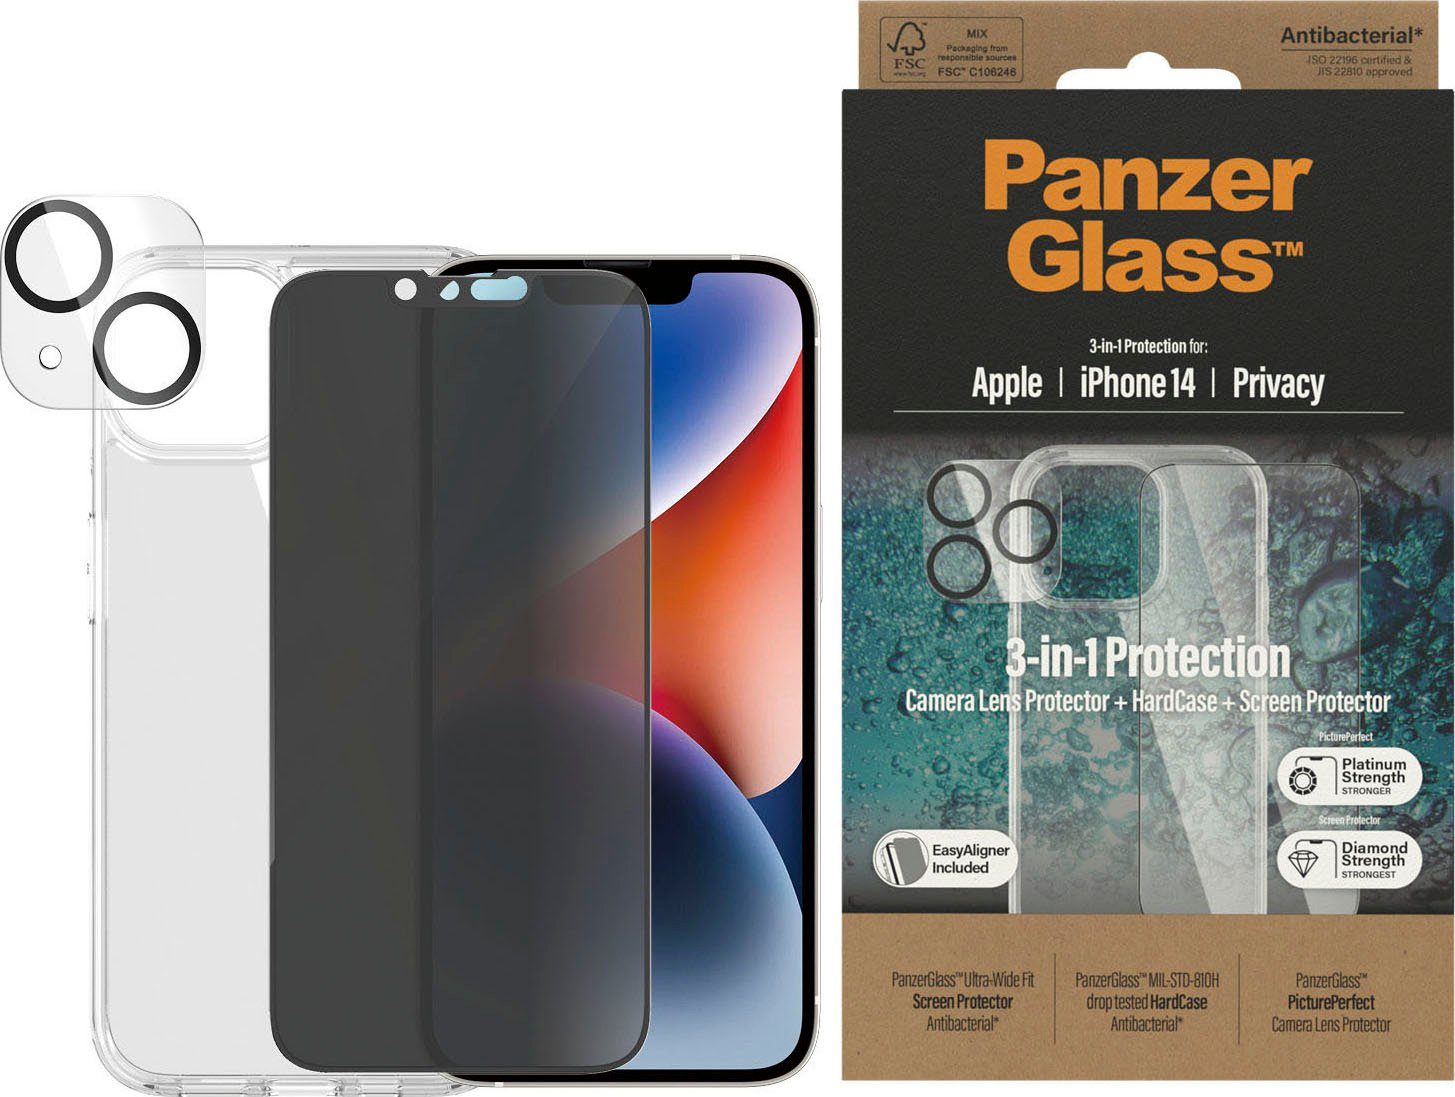 PanzerGlass Ultra Wide Fit Screen Protector Privacy iPhone 14 Plus / 13 Pro  Max ab 18,19 €